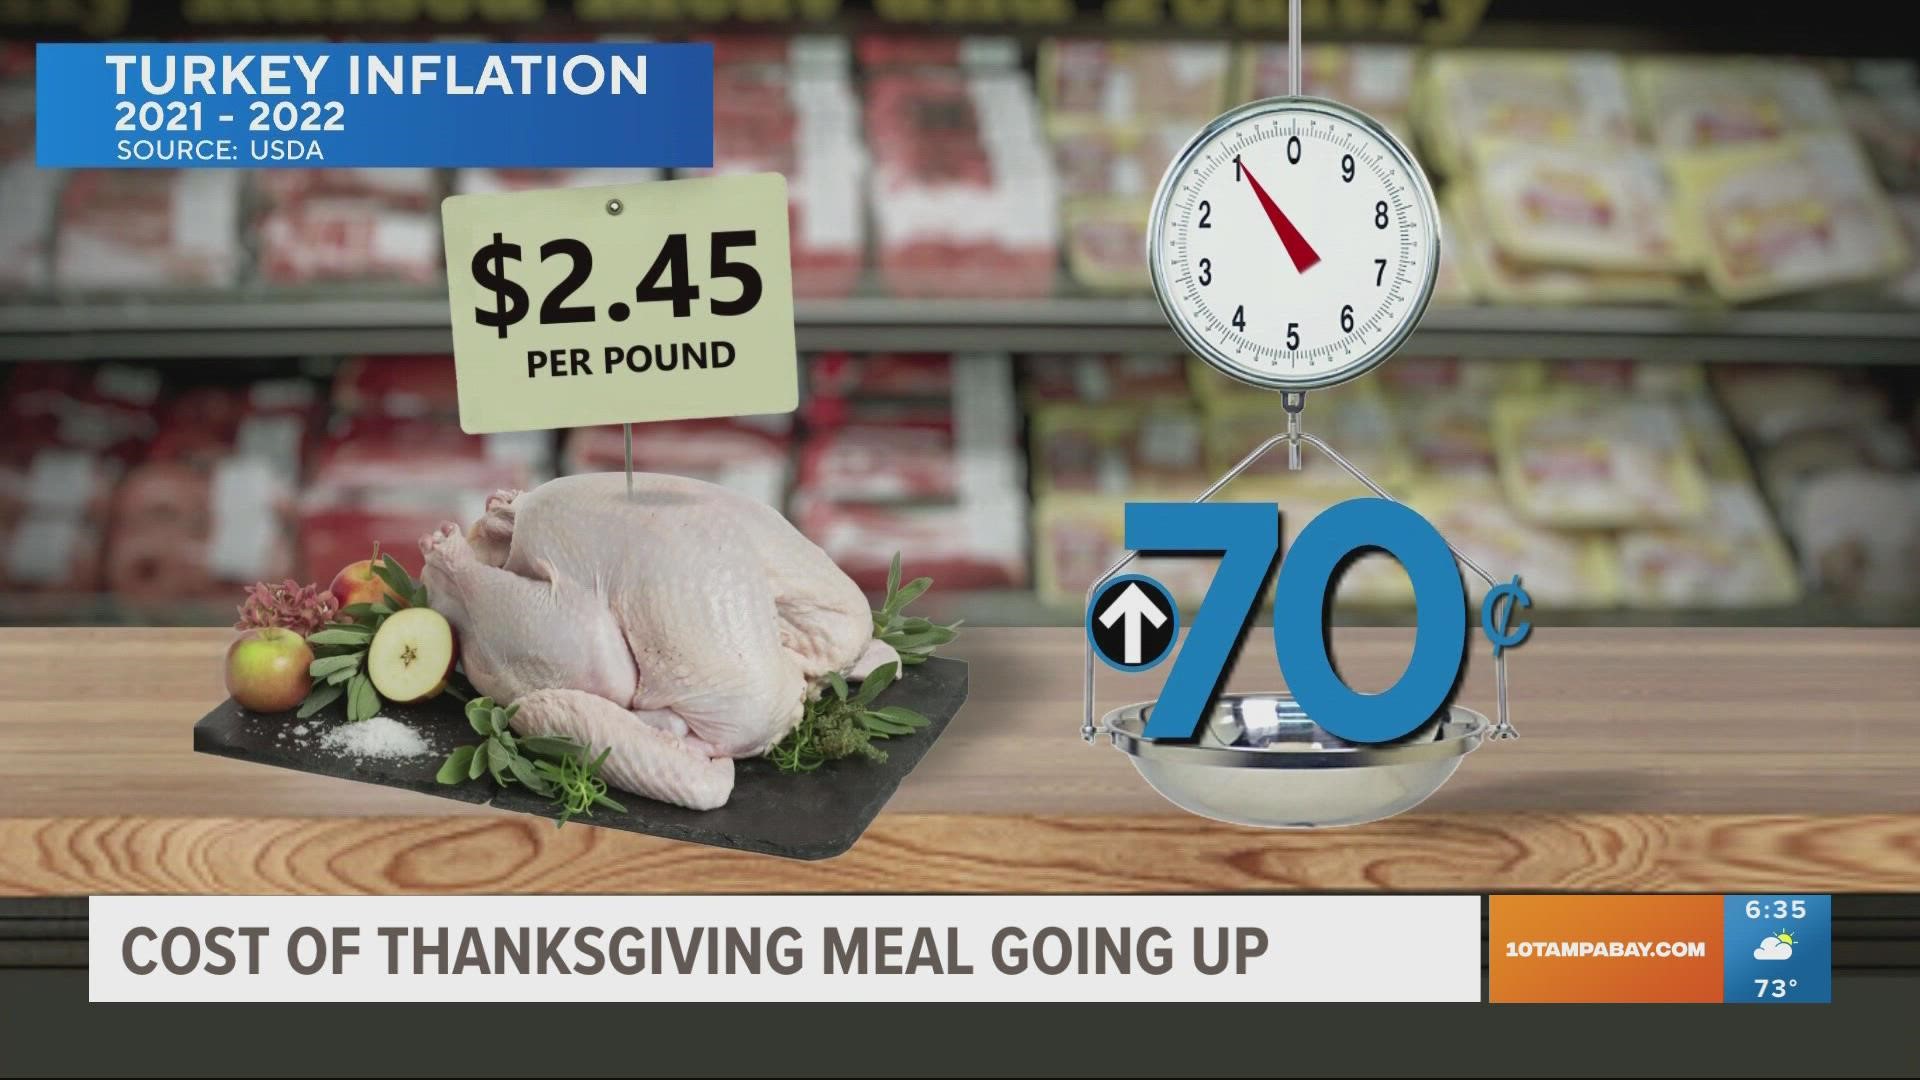 High inflation rates and bird flu are two factors affecting the price of your Thanksgiving meal this year.